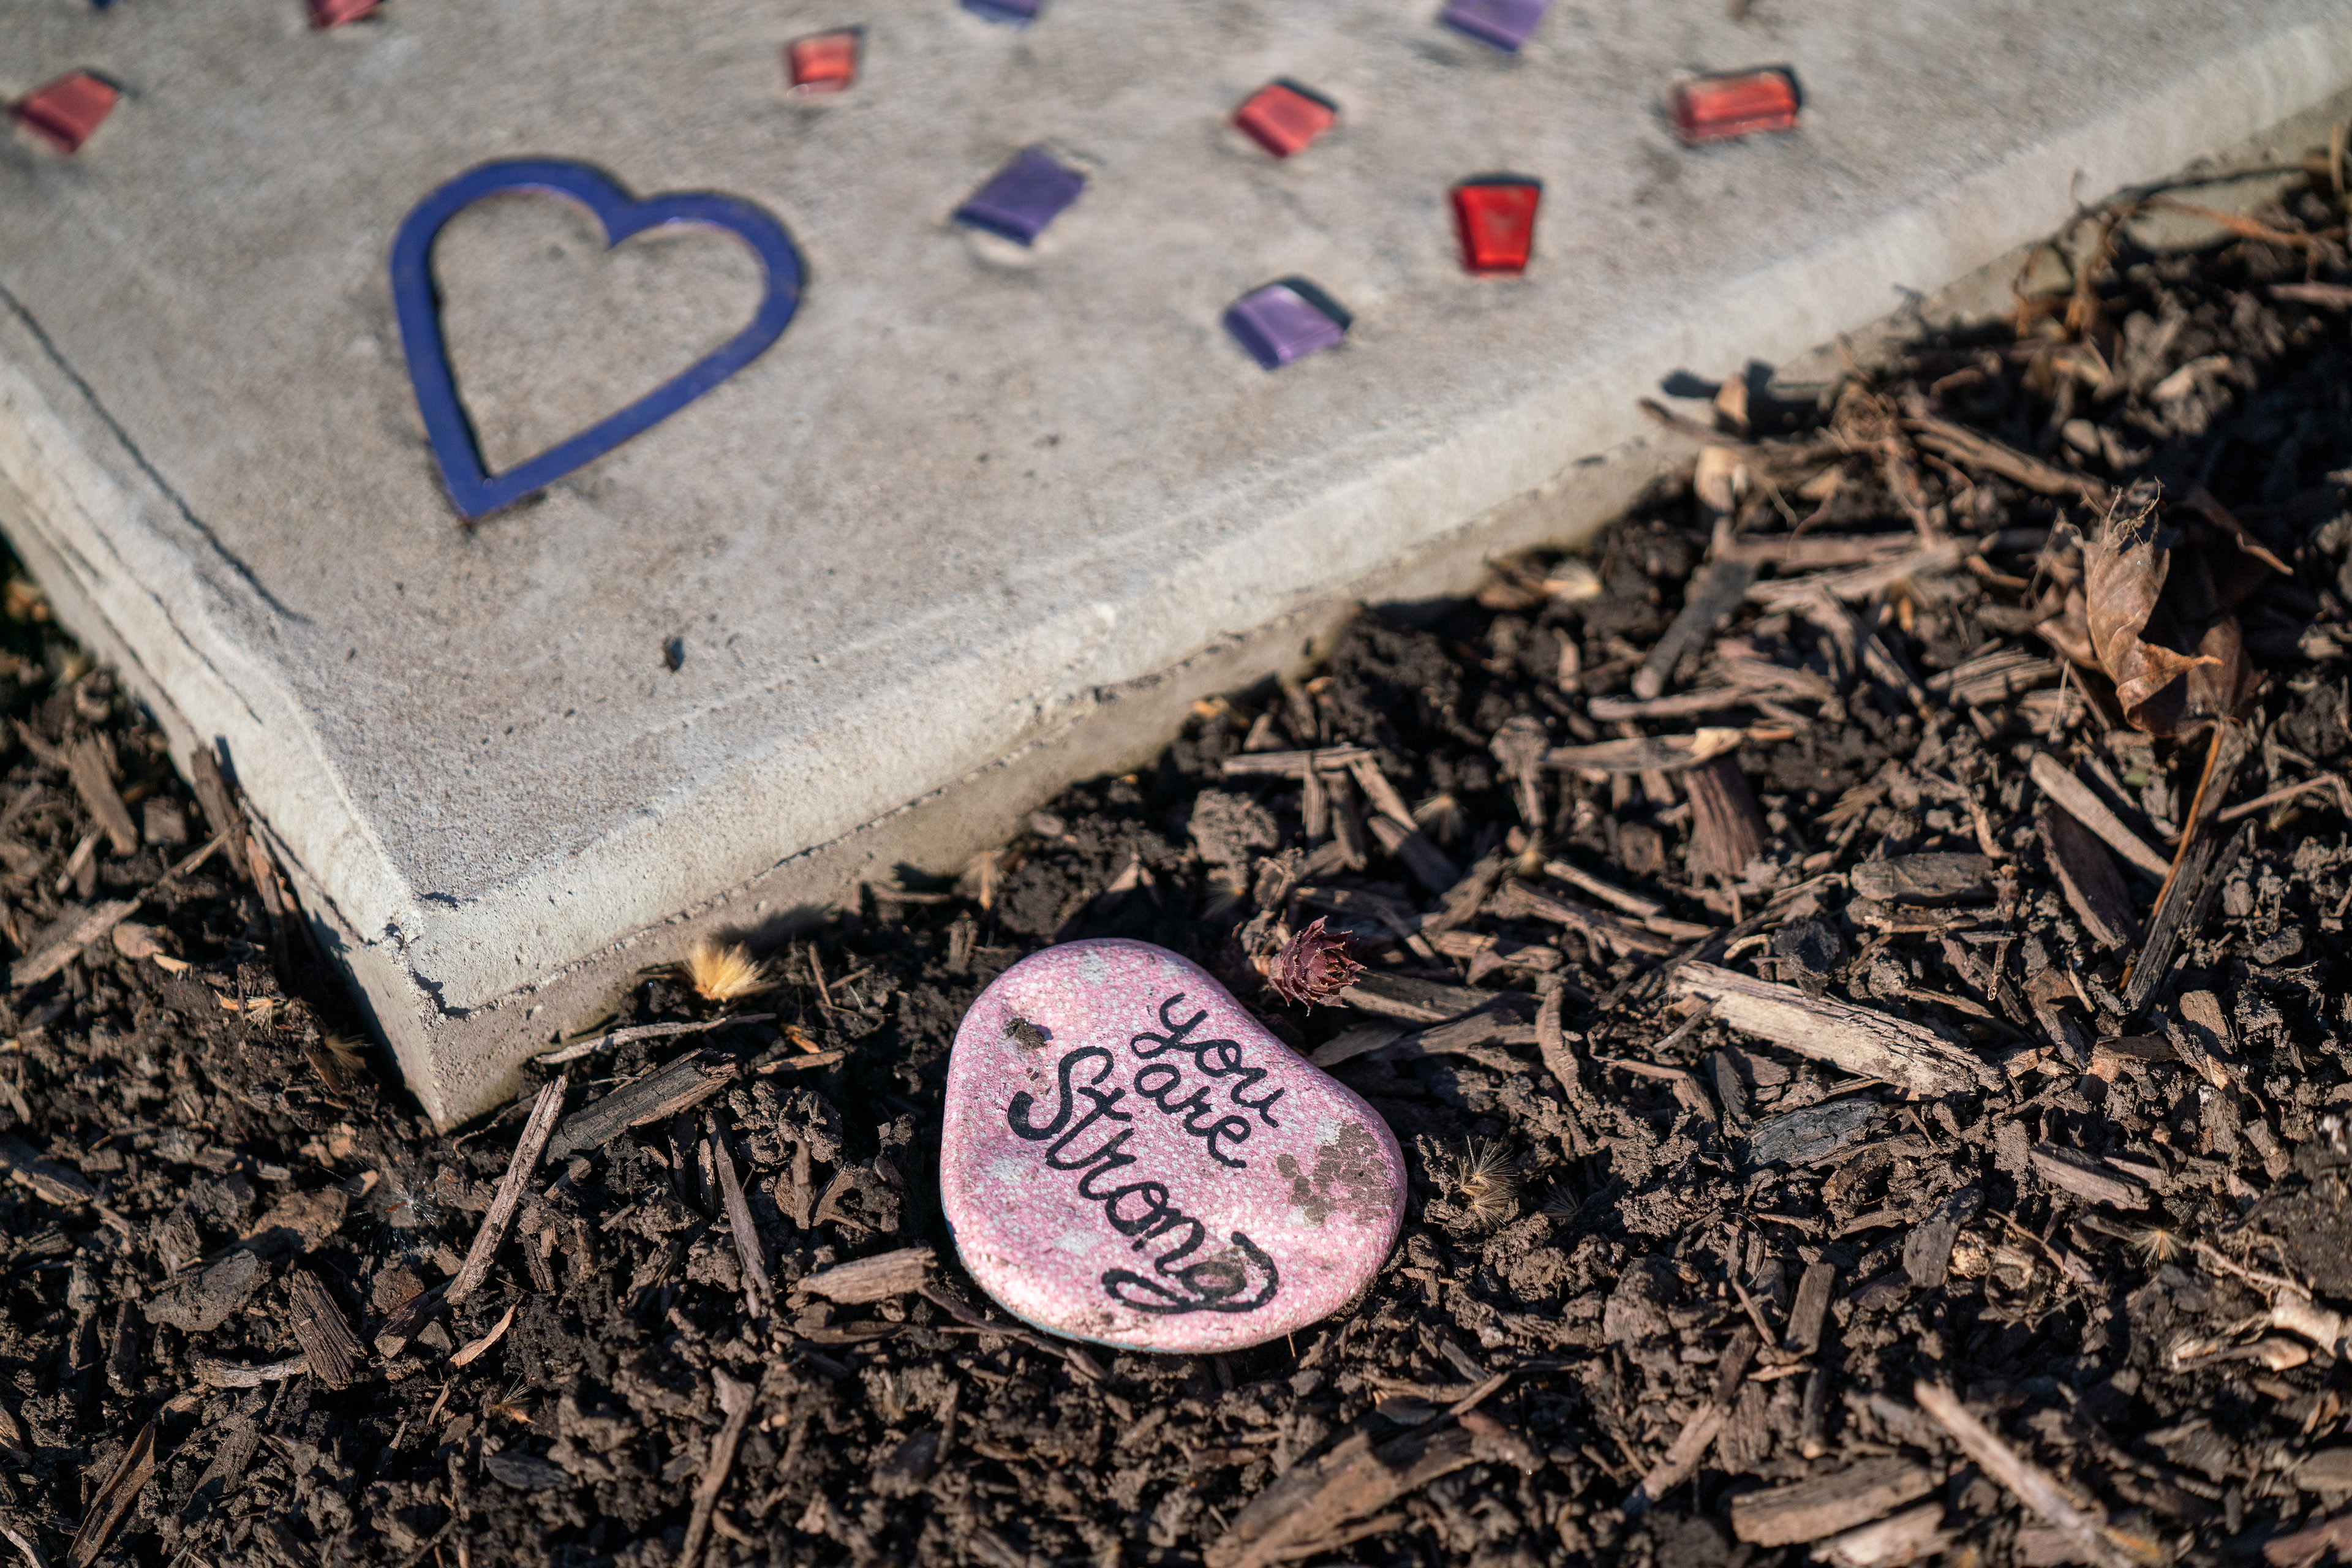 A stone that is painted with the phrase "You are strong" sits on the ground at the Circle of Hope statue in Tuckahoe Park in Altoona, Pennsylvania.